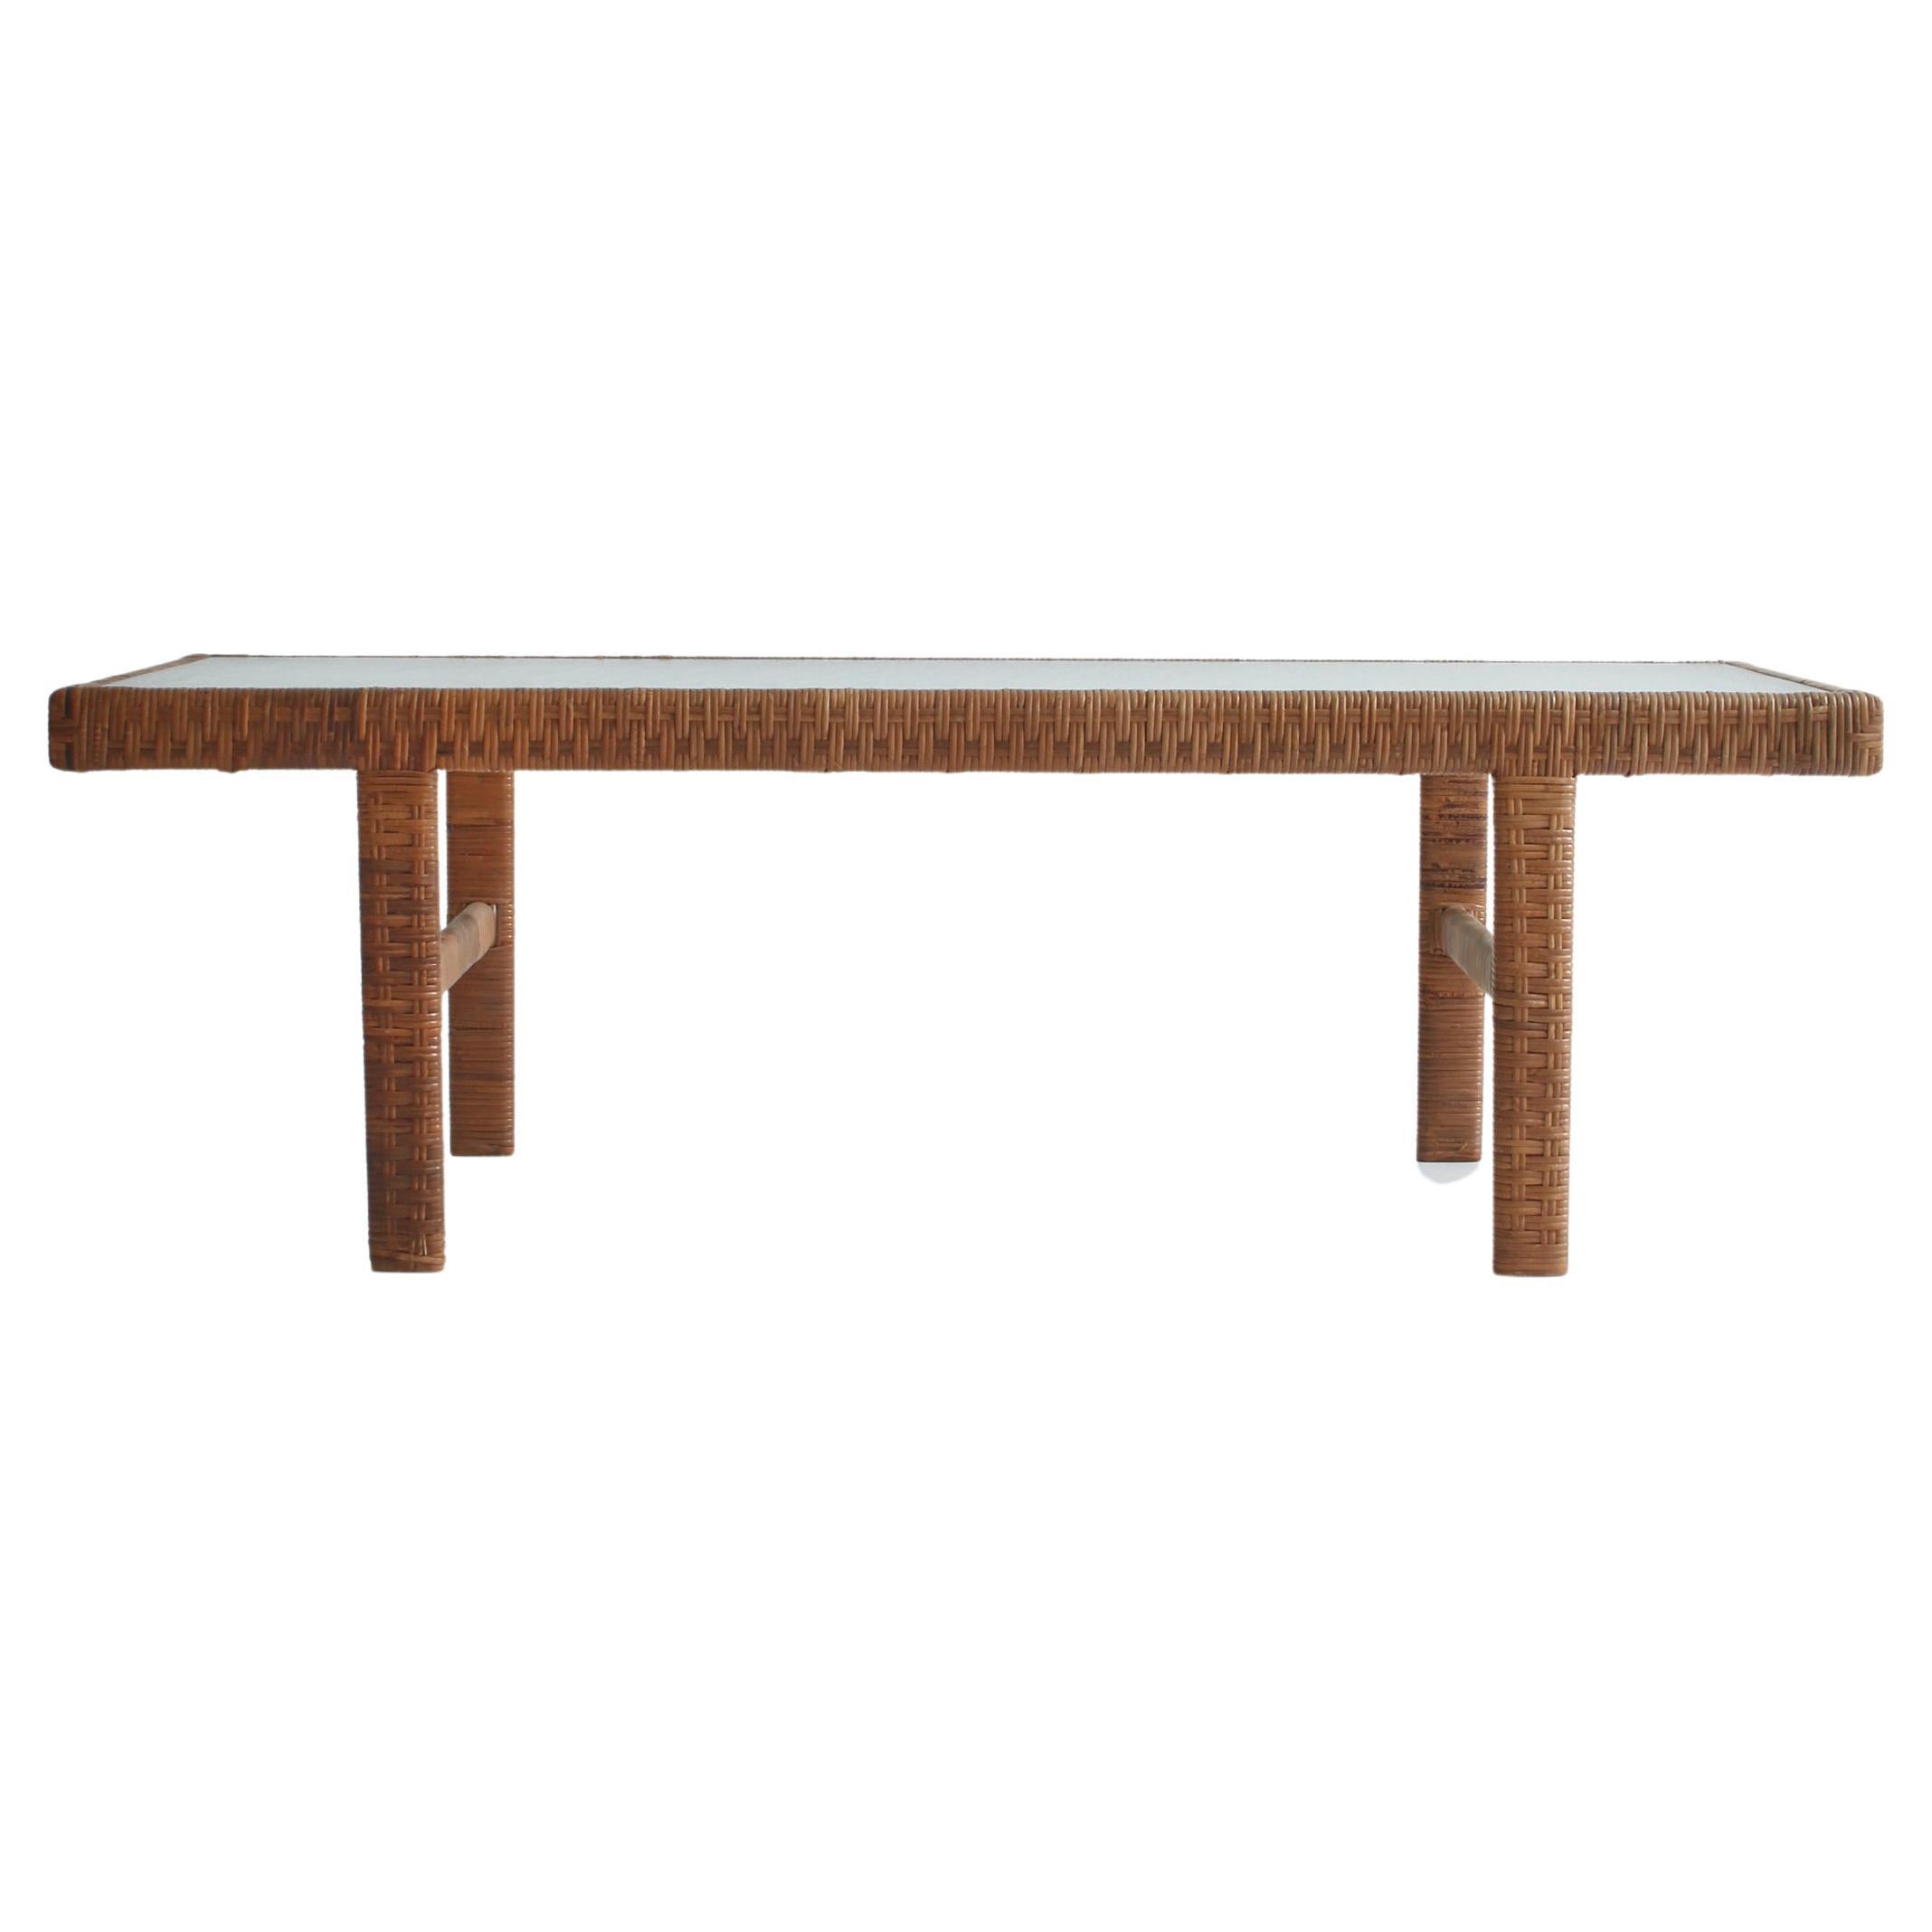 Danish Modern Coffee Table by R. Wengler in Rattan Cane and Matt Glass, 1940s For Sale